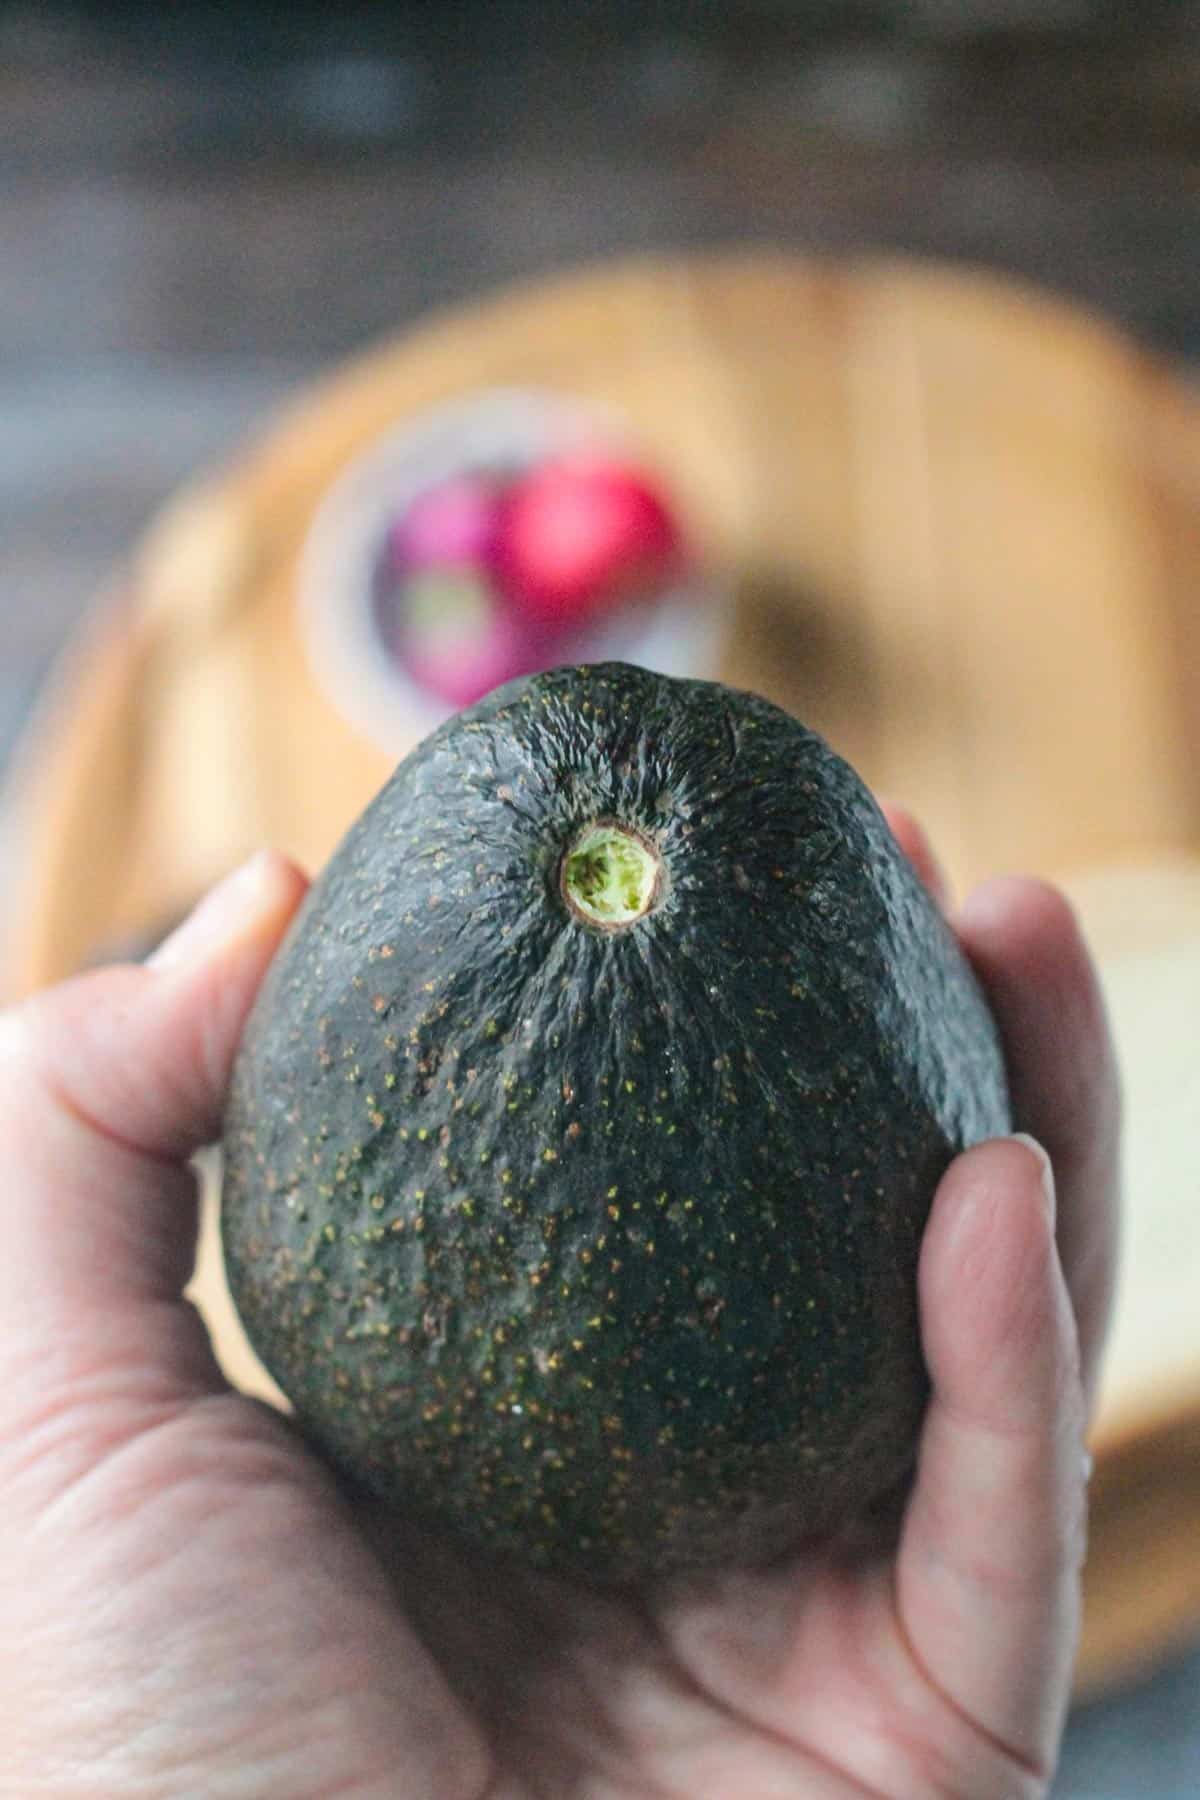 Hand holding a ripe avocado with the stem cap removed showing the green color underneath.